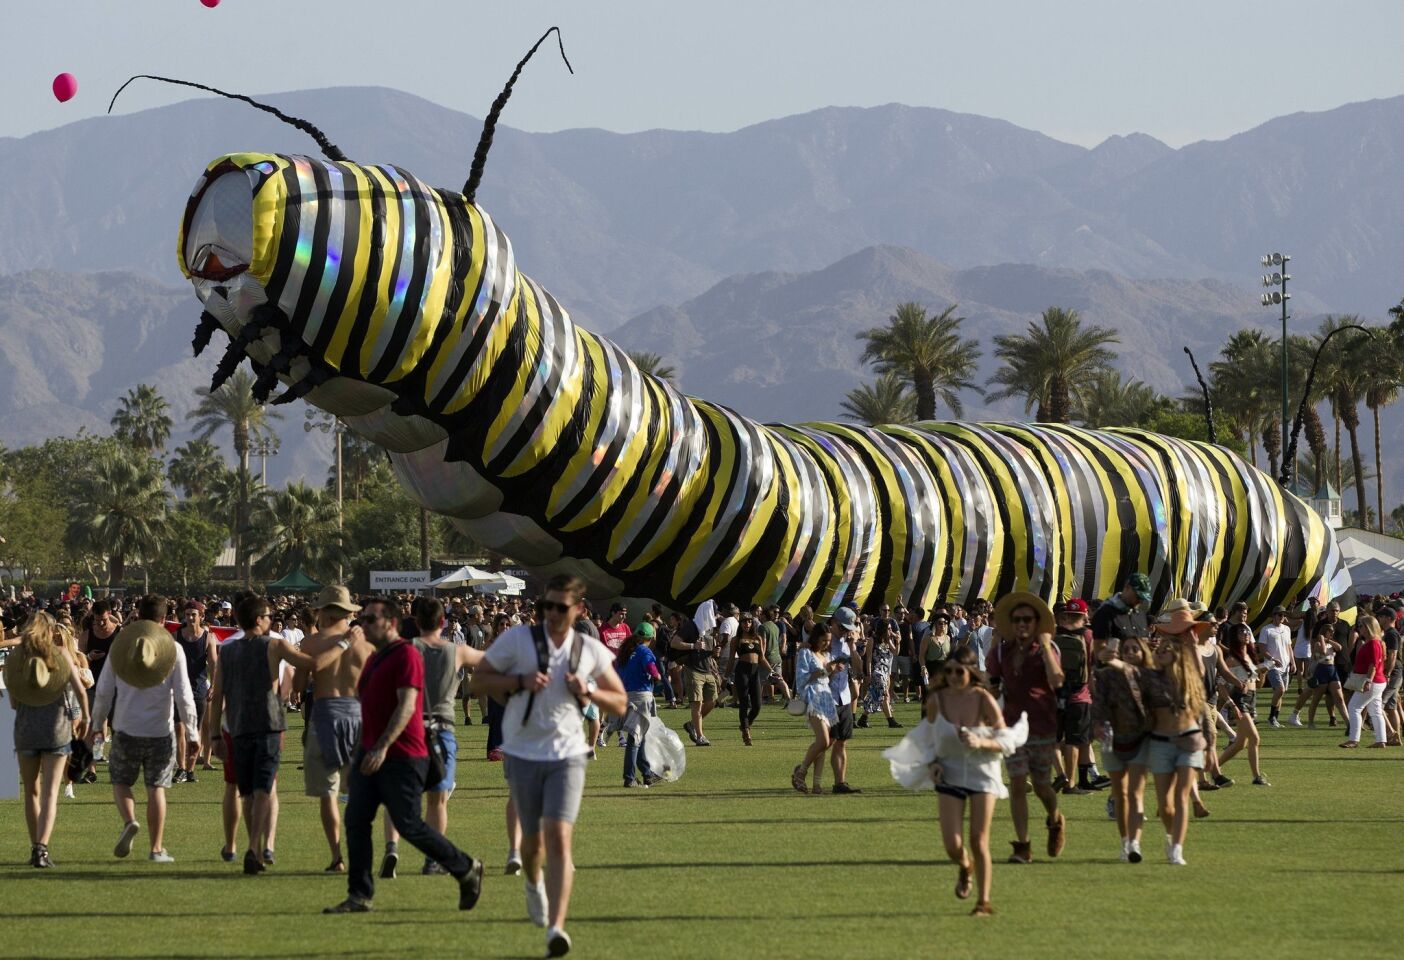 The 2015 Coachella Valley Music and Arts Festival gets underway. A moving Caterpillar named Papilio Merraculous made by Poetic Kinetics makes its way across the festival grounds.